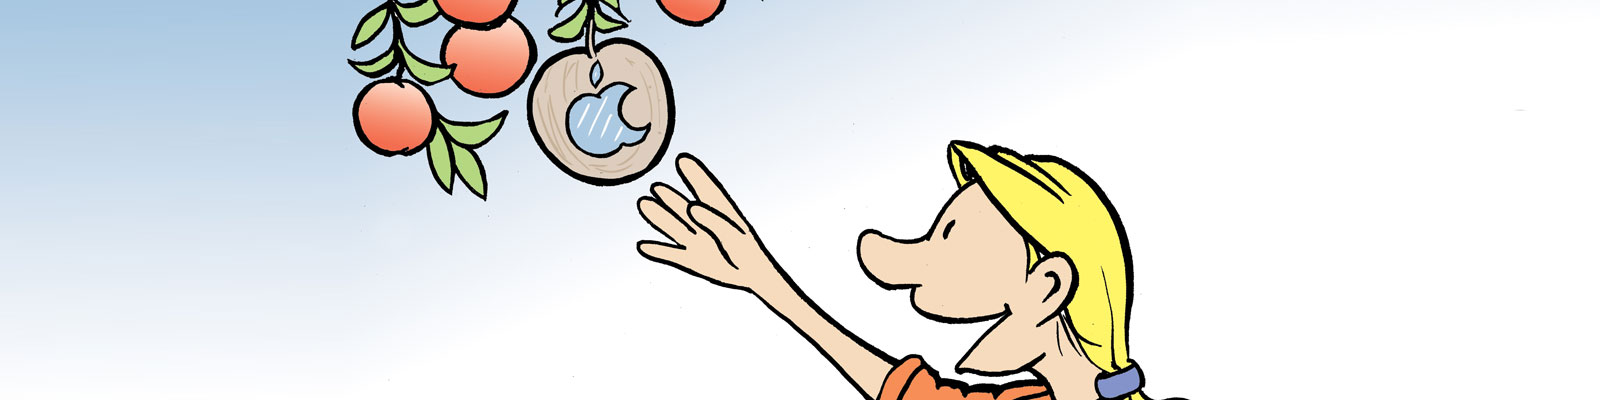 Illustration of finding a wooden apple in a tree for the Apples to iPads program